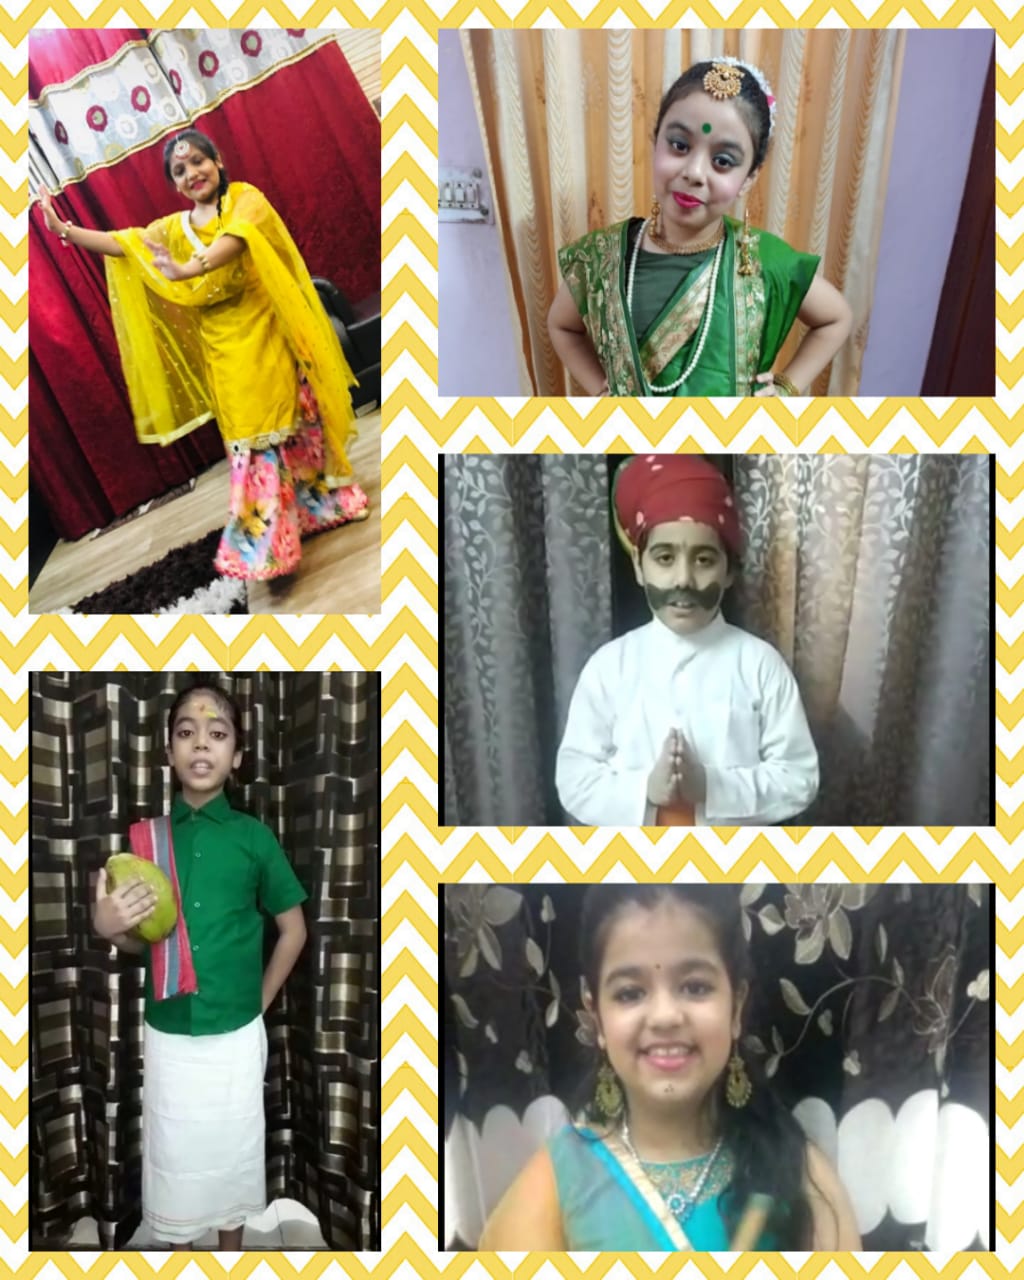  Fancy Dress activity (States of India) for classes III - V